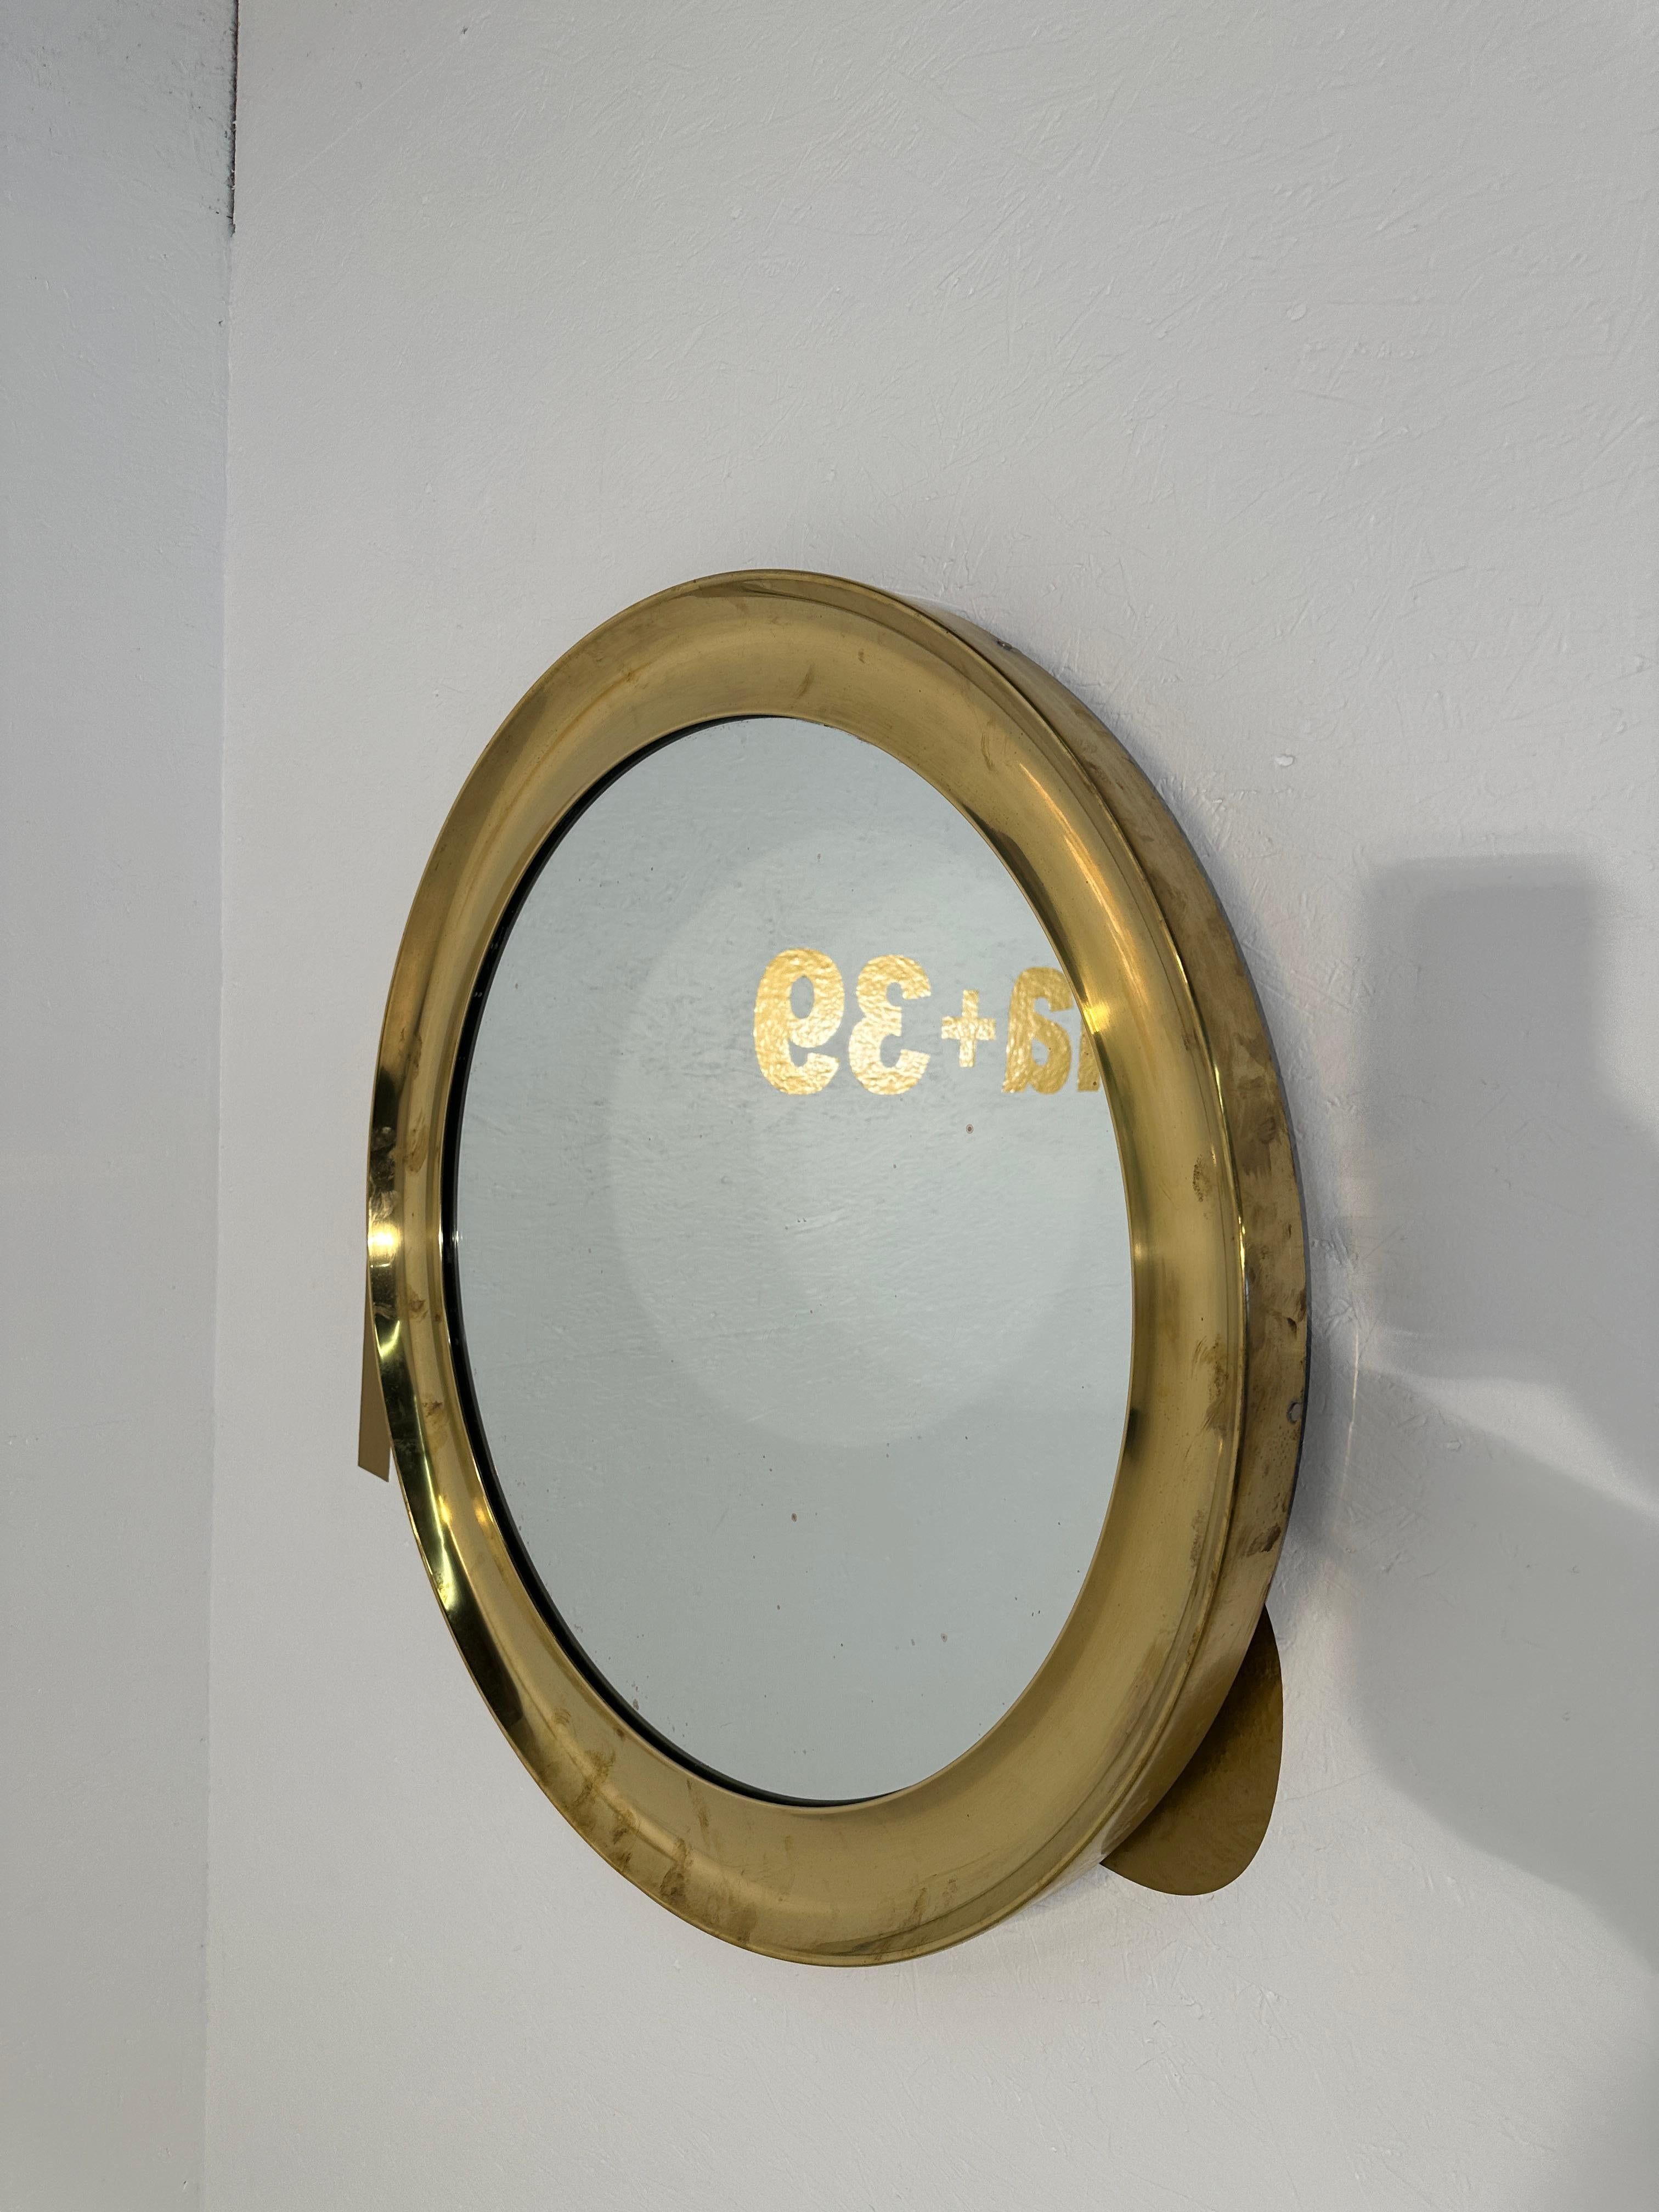 An exquisite Vintage Italian Round Brass Mirror from the 1980s, exuding timeless elegance with its classic design and lustrous brass frame. Reflecting the charm of Italian craftsmanship, this mirror adds a touch of sophistication to any space.

